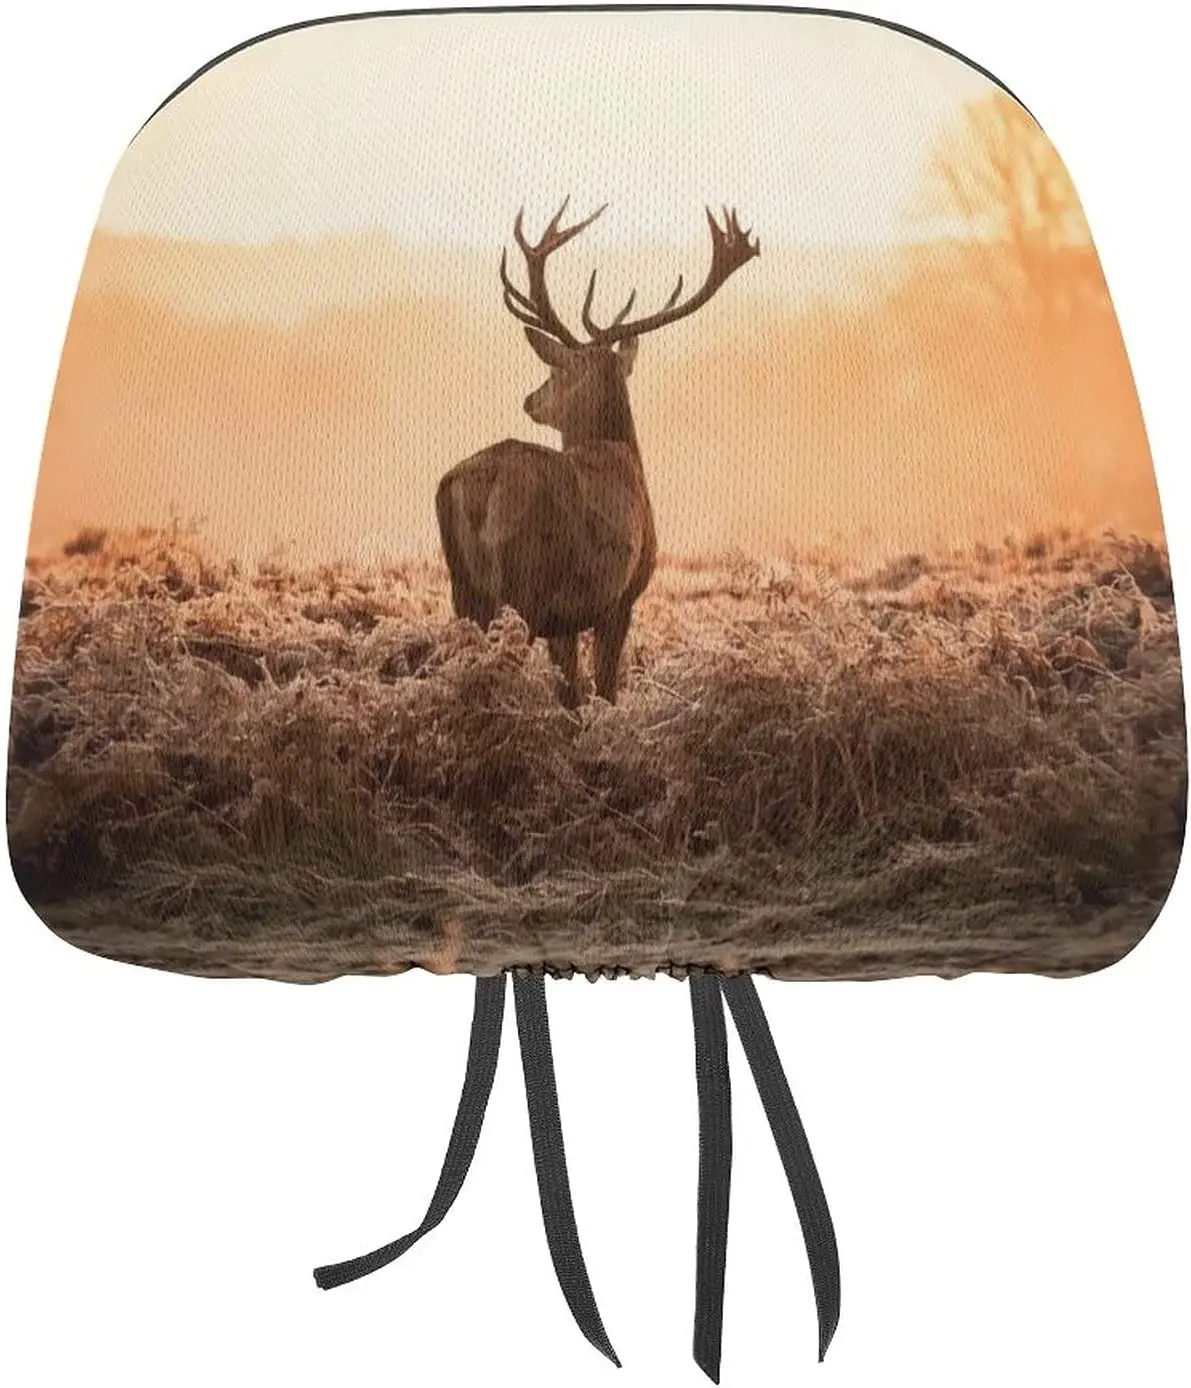 

Deer Wilderness Nature Countryside Pattern 2 Pack Car Headrest Cover Seat Rest Protector Cover Universal Fit Most Car/T